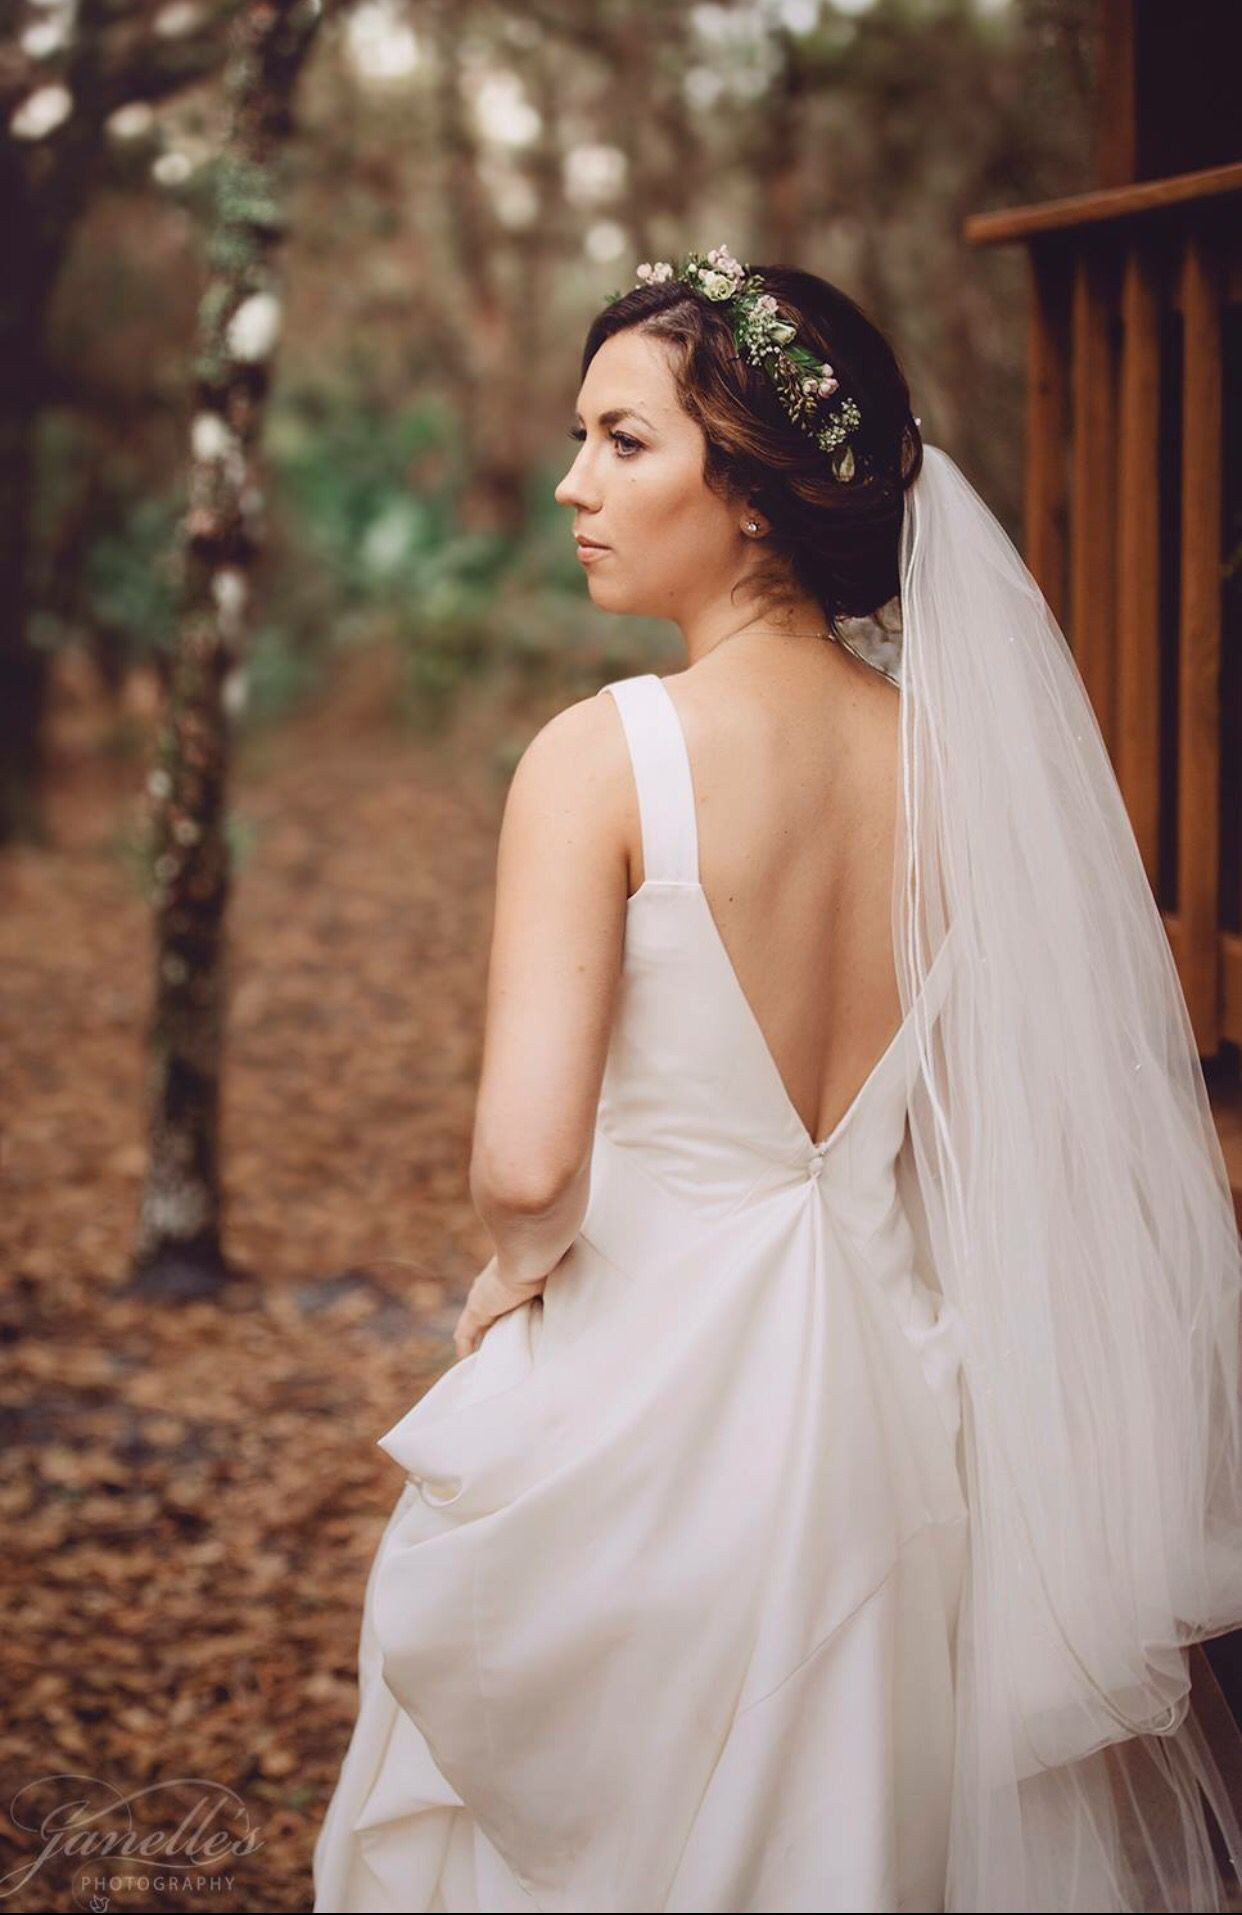 Wedding Veils With Flowers In Hair
 Flower Crown with cathedral veil & open back wedding dress